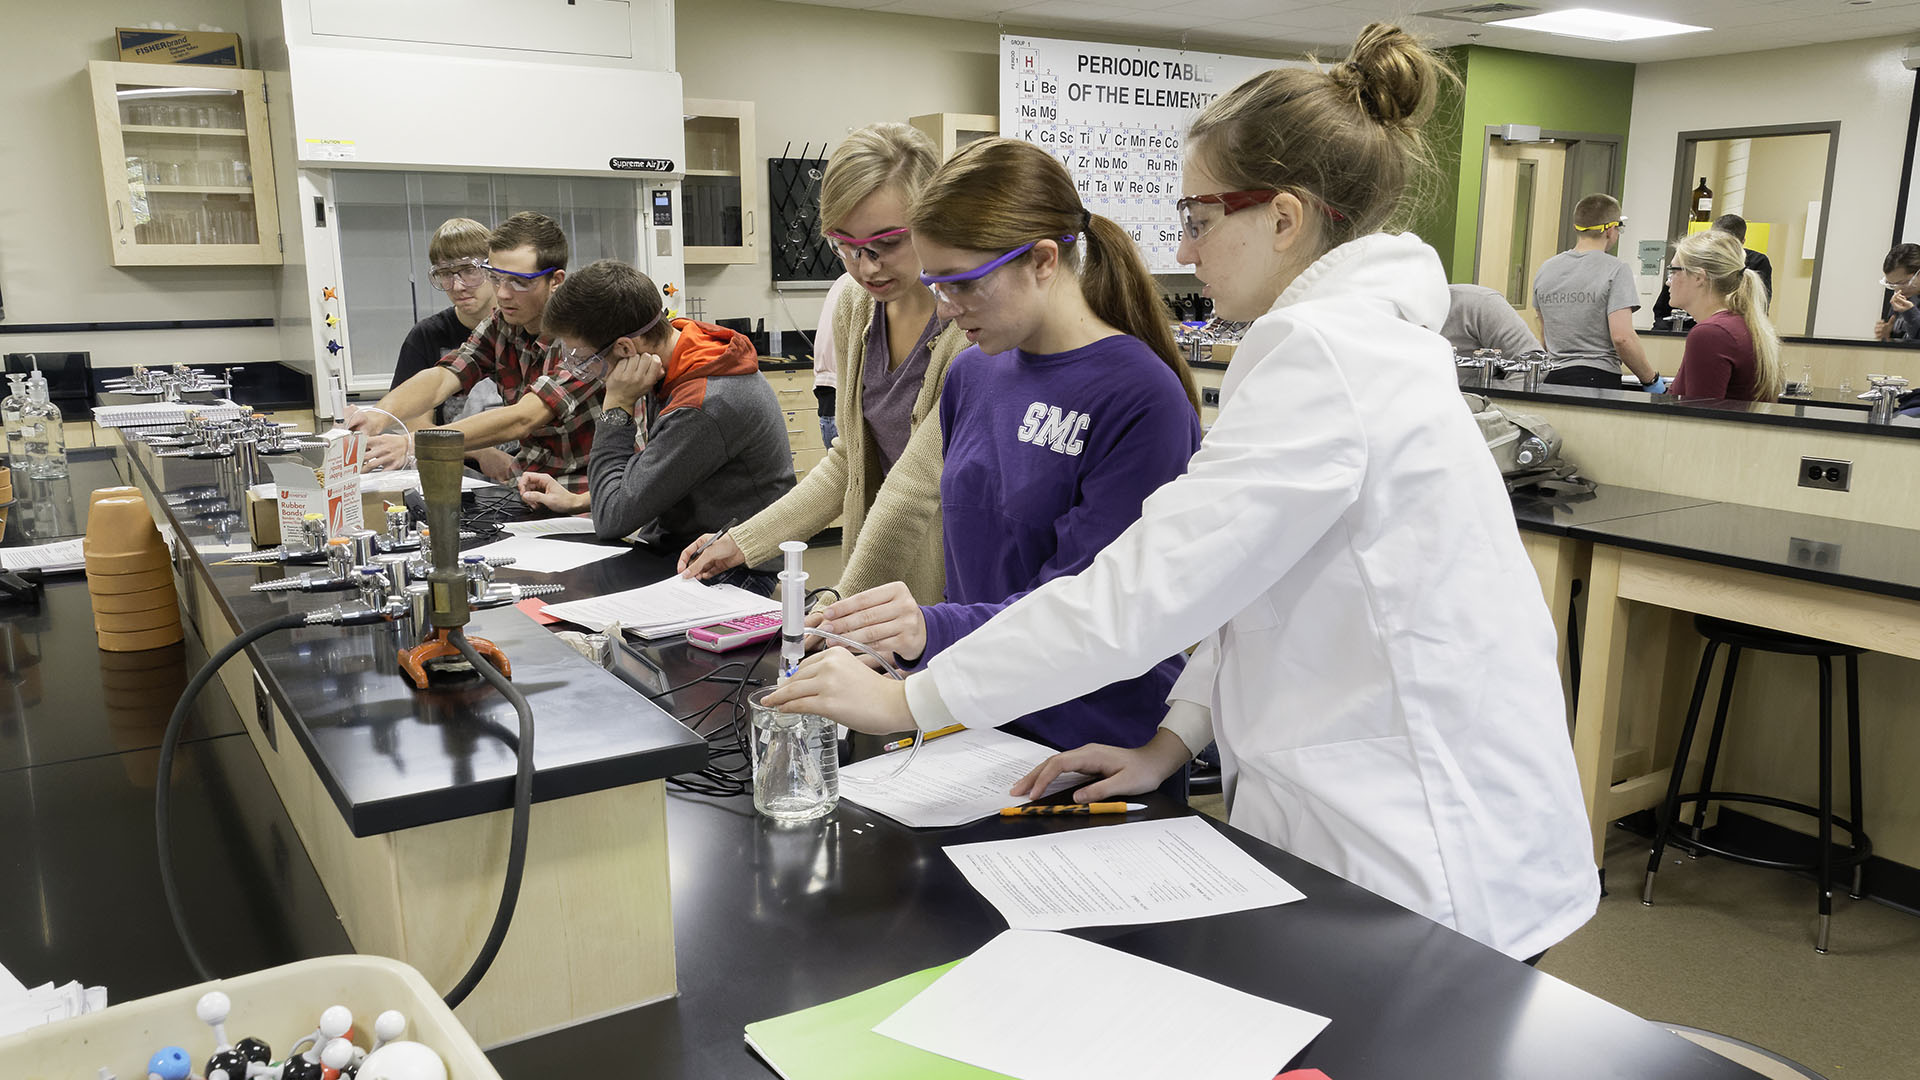 Students performing an experiment in a lab